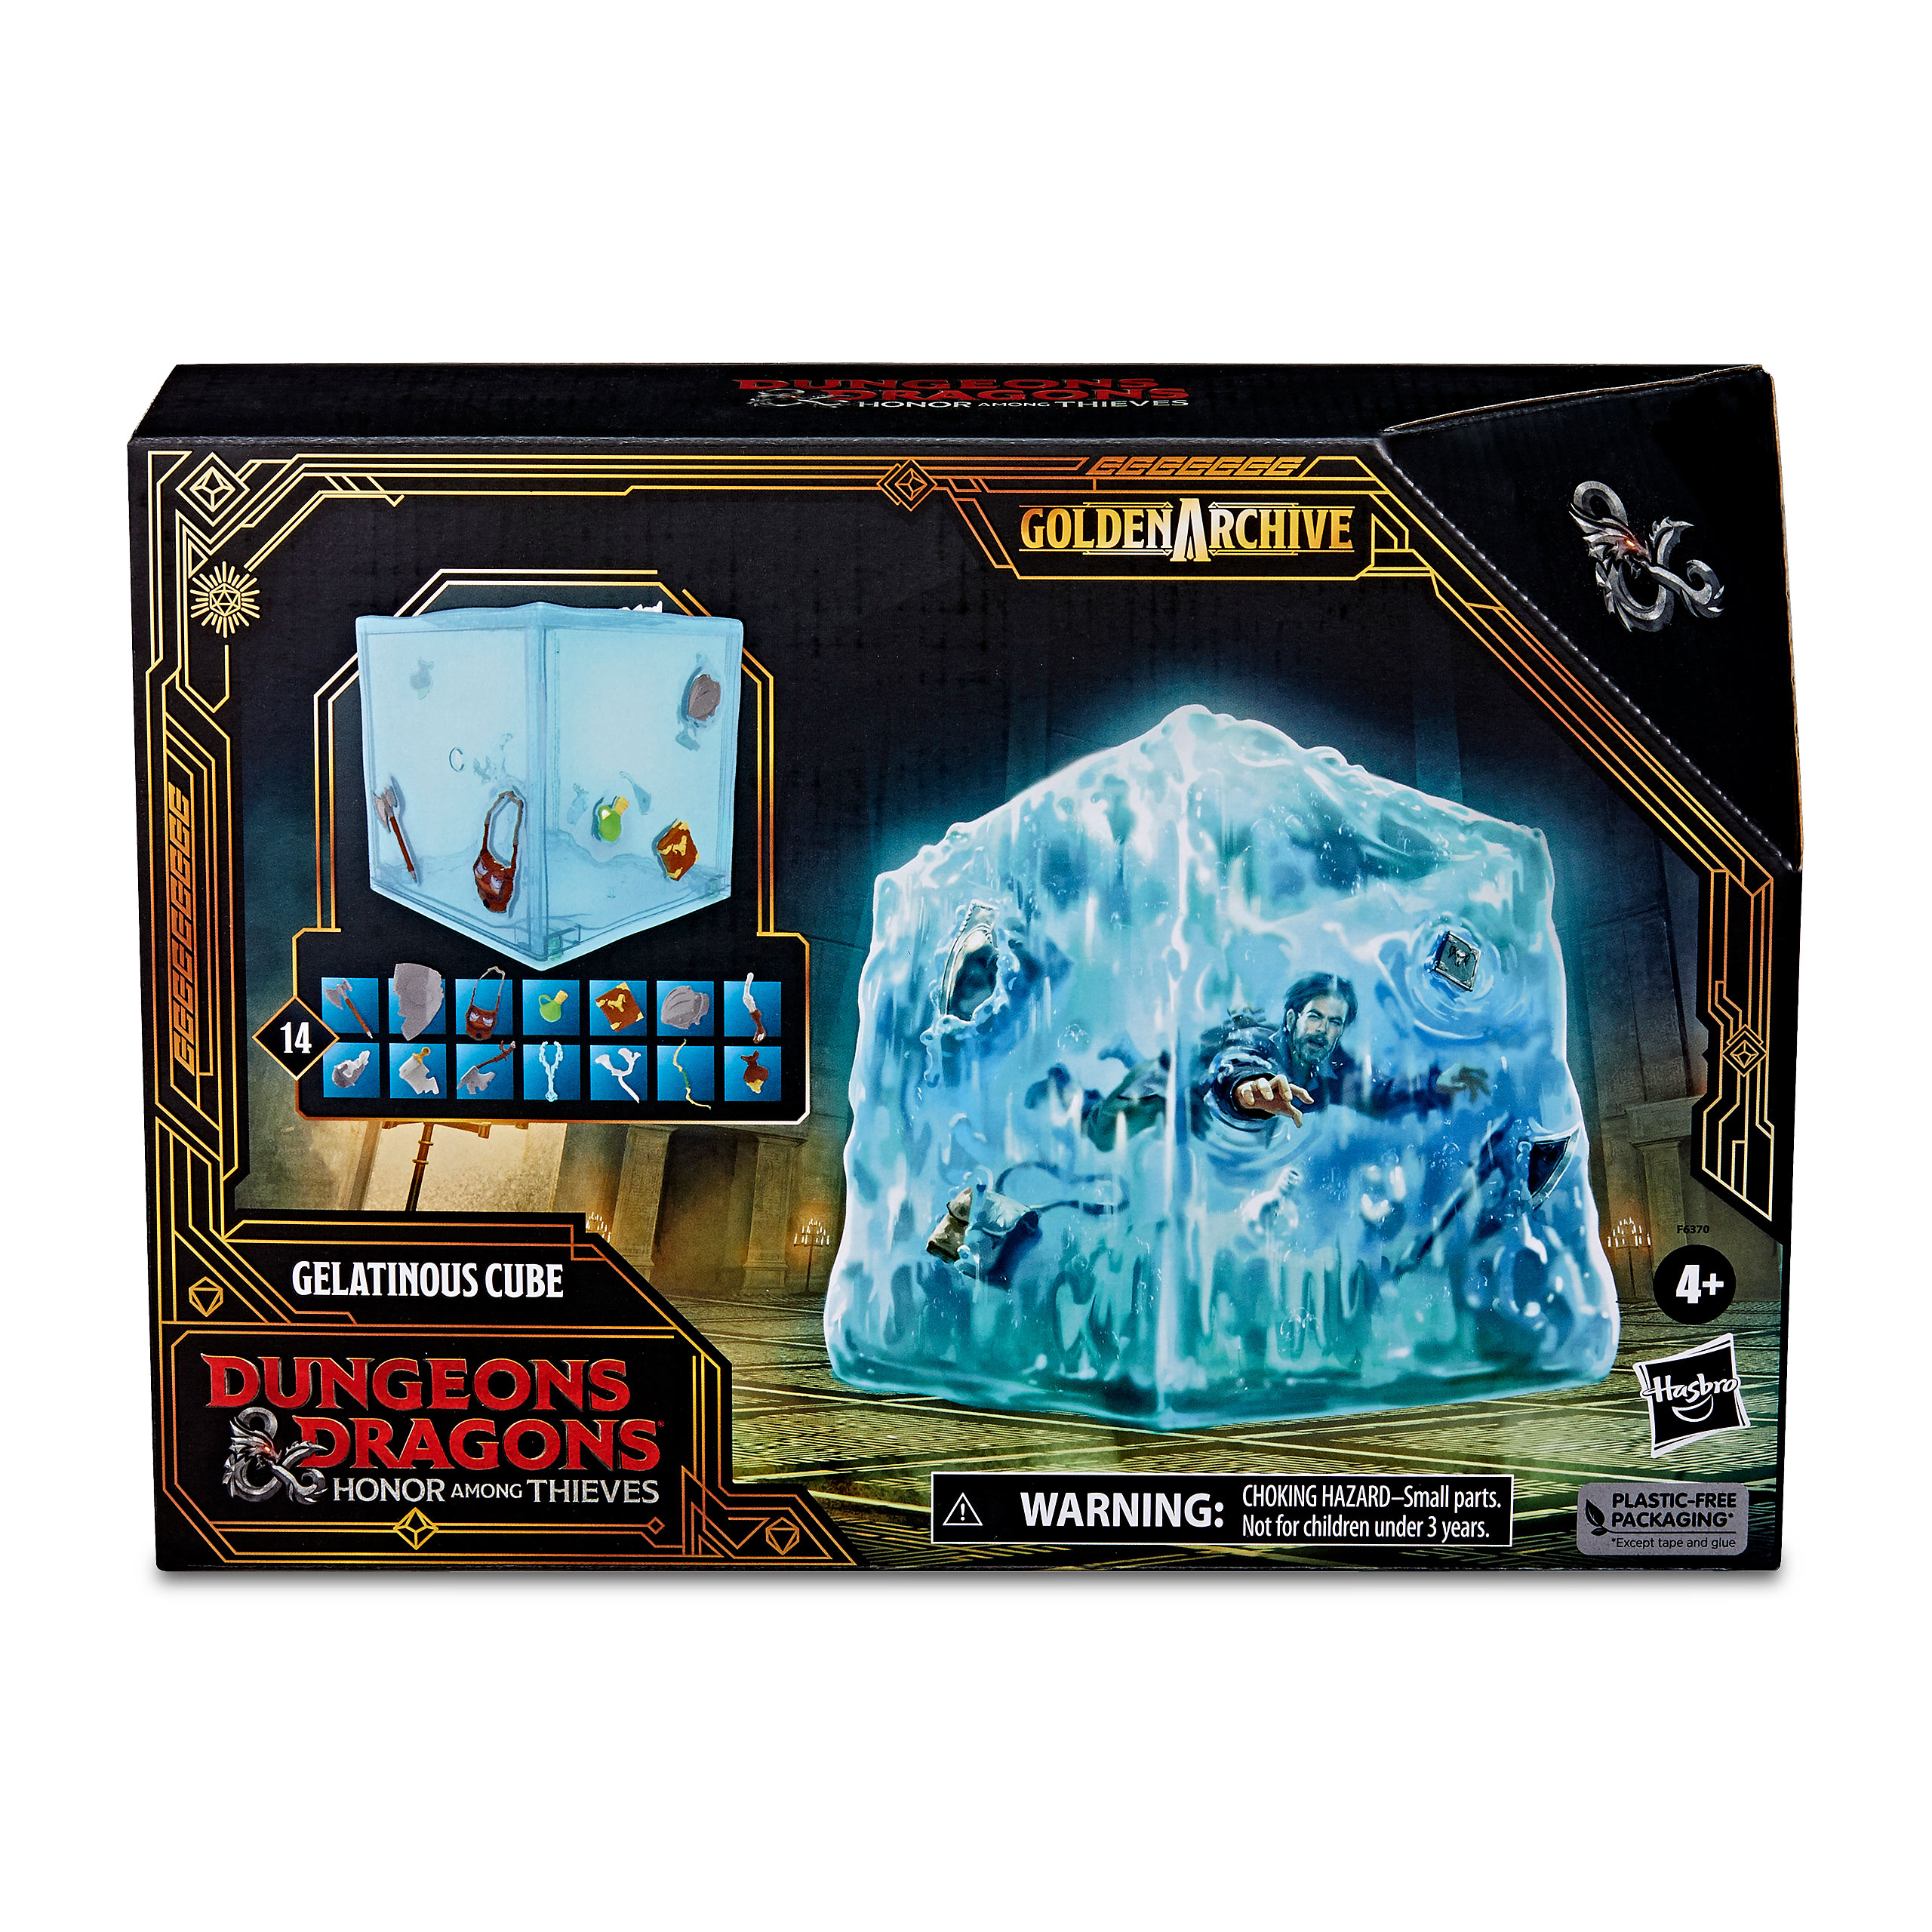 Dungeons & Dragons - Gelatinous Cube / Ooze Cube